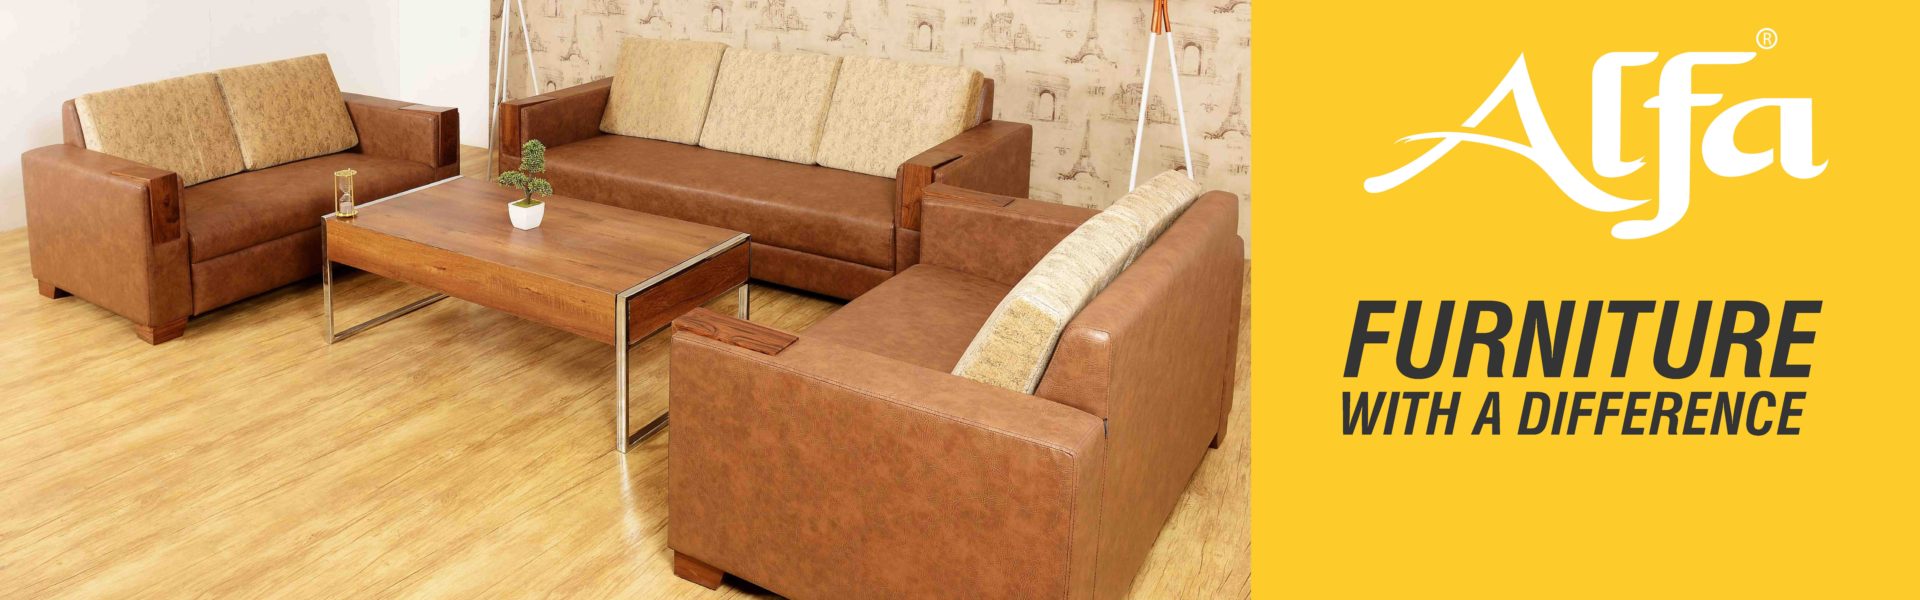 Office Sofa Manufacturer and Supplier in Chandigarh